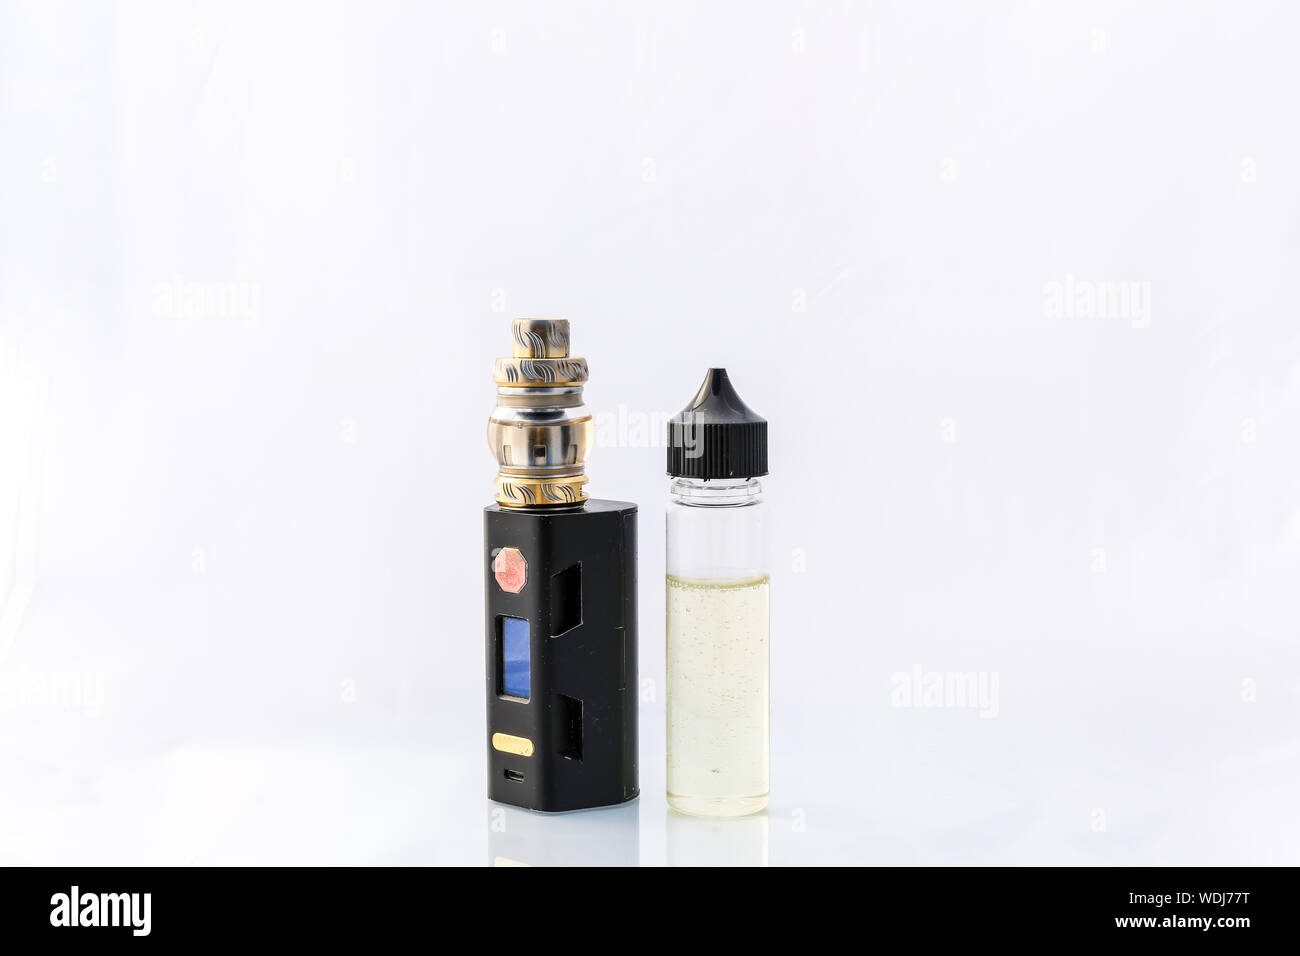 A electric cigarette vape deice with a bottle of liquid stood next to it. Shot against a clean white background Stock Photo